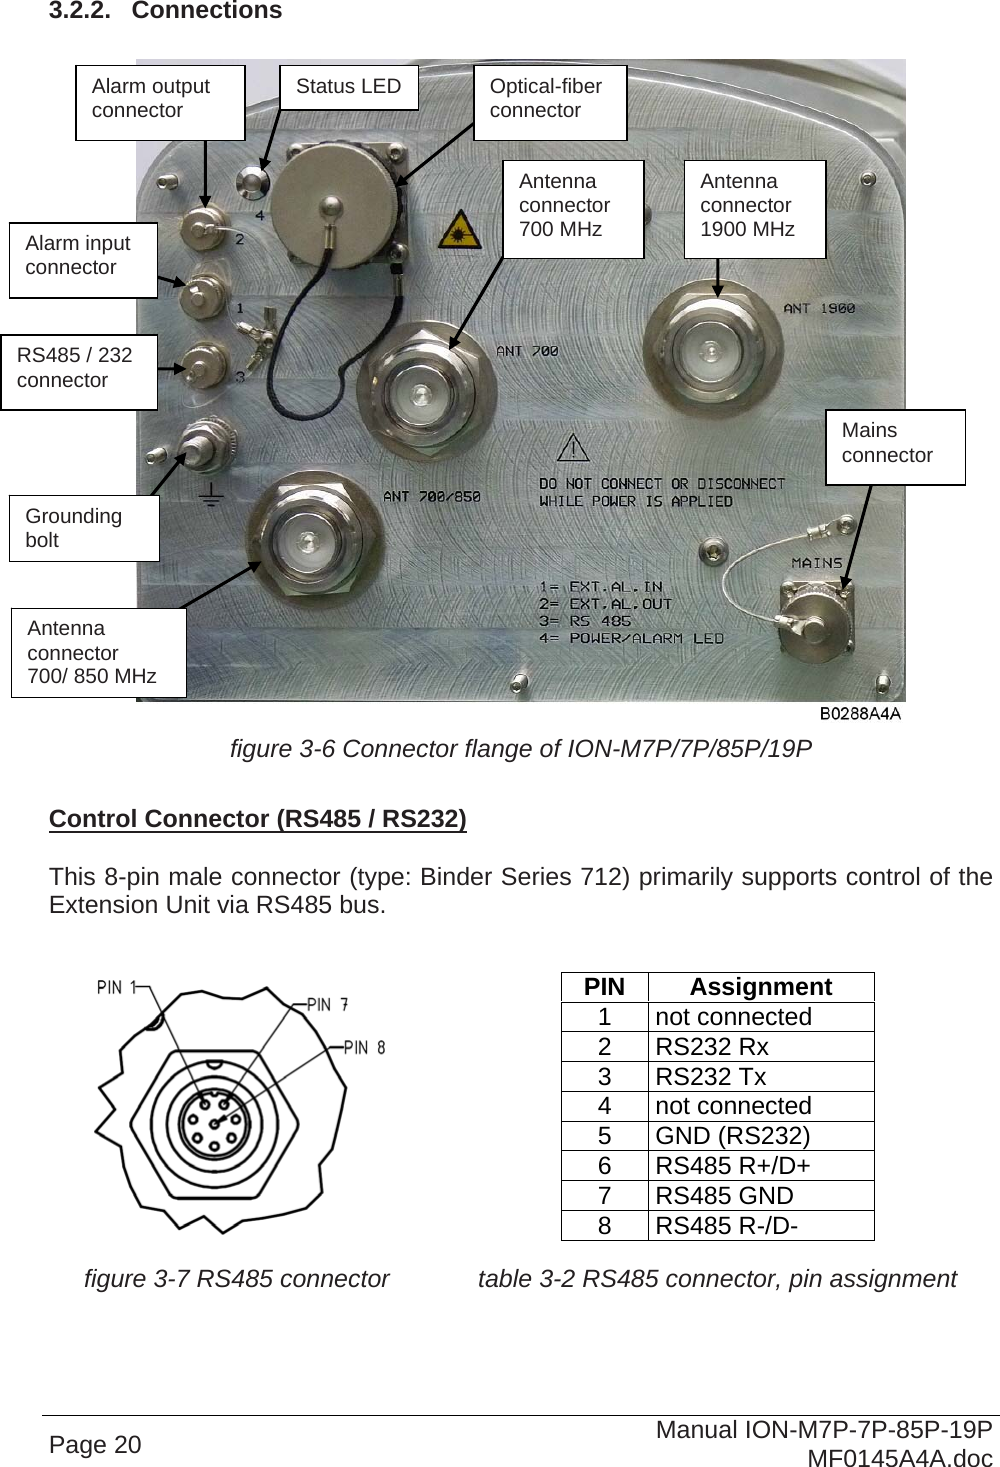  3.2.2.  Connections   Page 20  Manual ION-M7P-7P-85P-19P MF0145A4A.doc figure 3-6 Connector flange of ION-M7P/7P/85P/19P  Control Connector (RS485 / RS232)  This 8-pin male connector (type: Binder Series 712) primarily supports control of the Extension Unit via RS485 bus.    PIN Assignment 1 not connected 2 RS232 Rx 3 RS232 Tx 4 not connected 5 GND (RS232) 6 RS485 R+/D+ 7 RS485 GND 8 RS485 R-/D- figure 3-7 RS485 connector  table 3-2 RS485 connector, pin assignment  Alarm output connector  Optical-fiber connector Status LED Antenna connector 700 MHz Antenna connector  1900 MHz Alarm input connector RS485 / 232 connector Mains connector Grounding bolt Antenna connector  700/ 850 MHz 